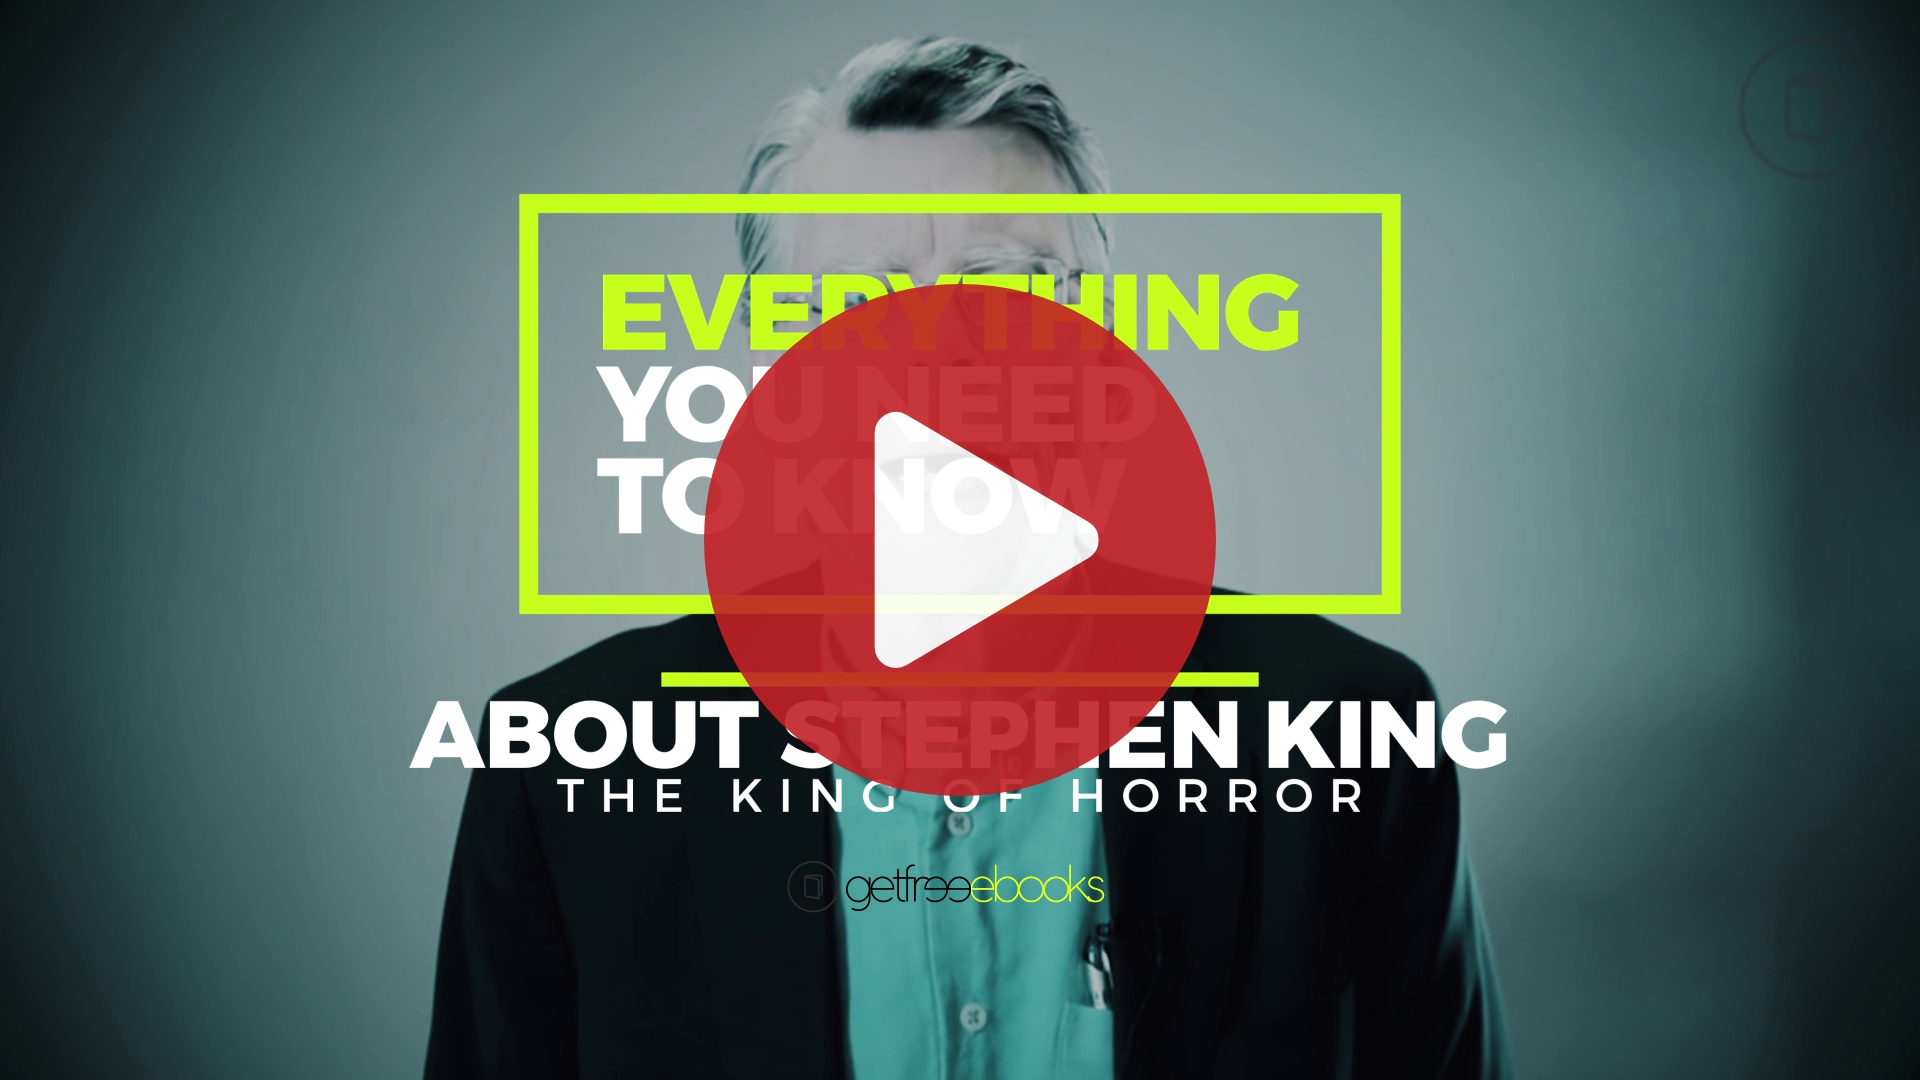 Everything You Need to Know About Stephen King - The King of Horror